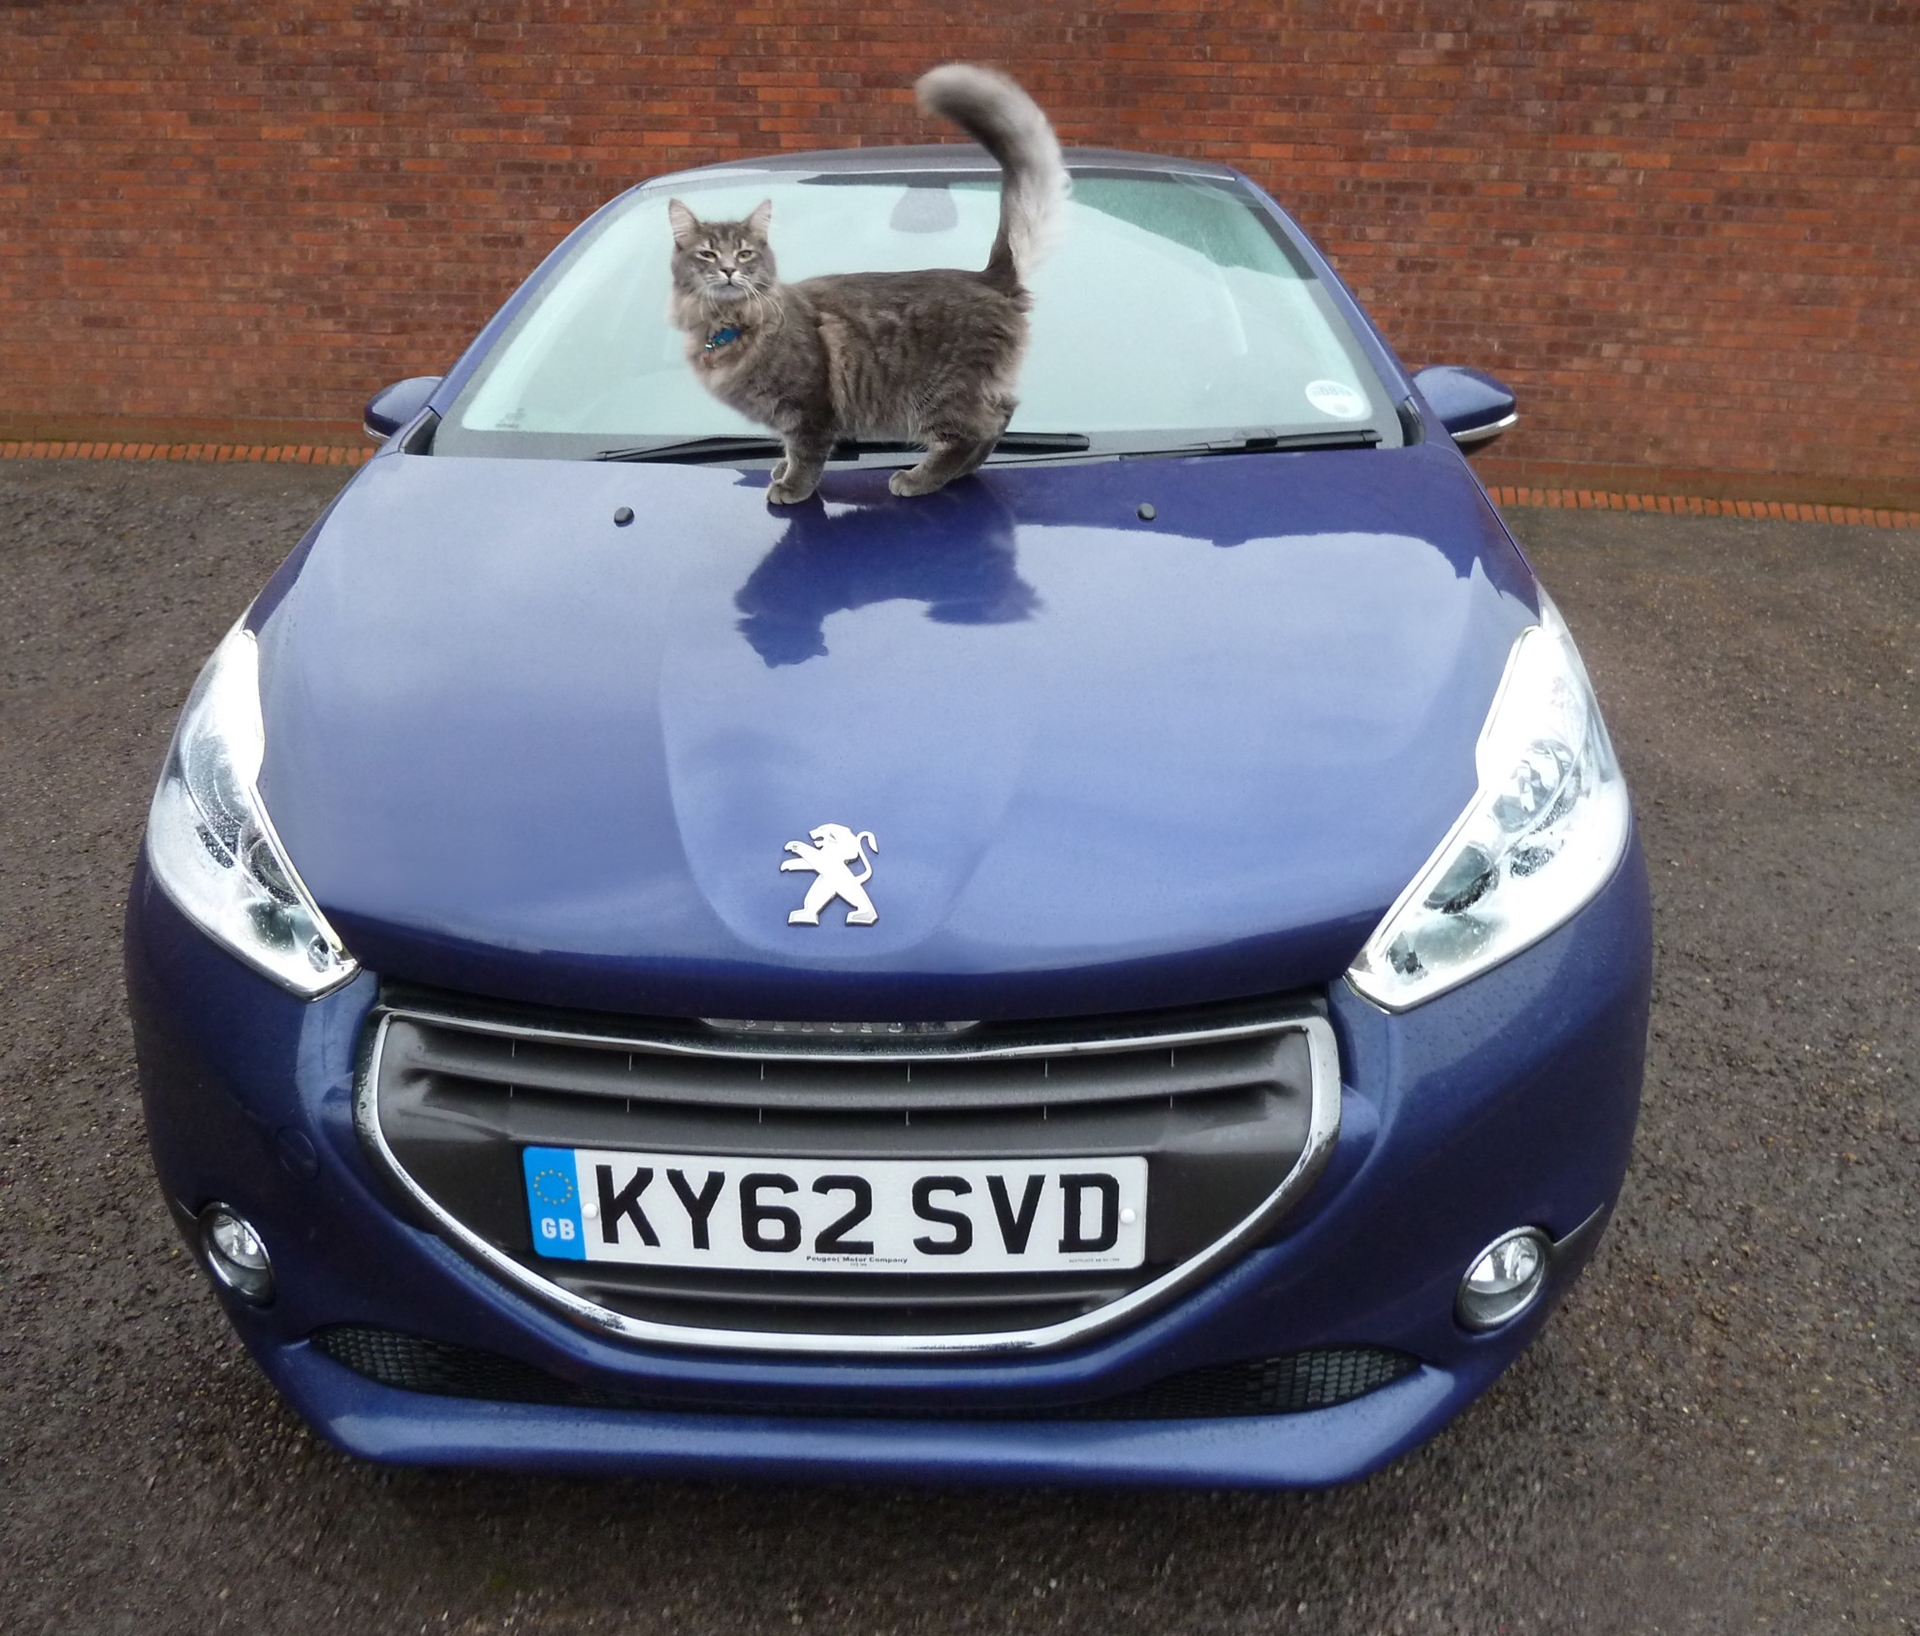 PEUGEOT INTRODUCES GARY’S CAT THIS CHRISTMAS